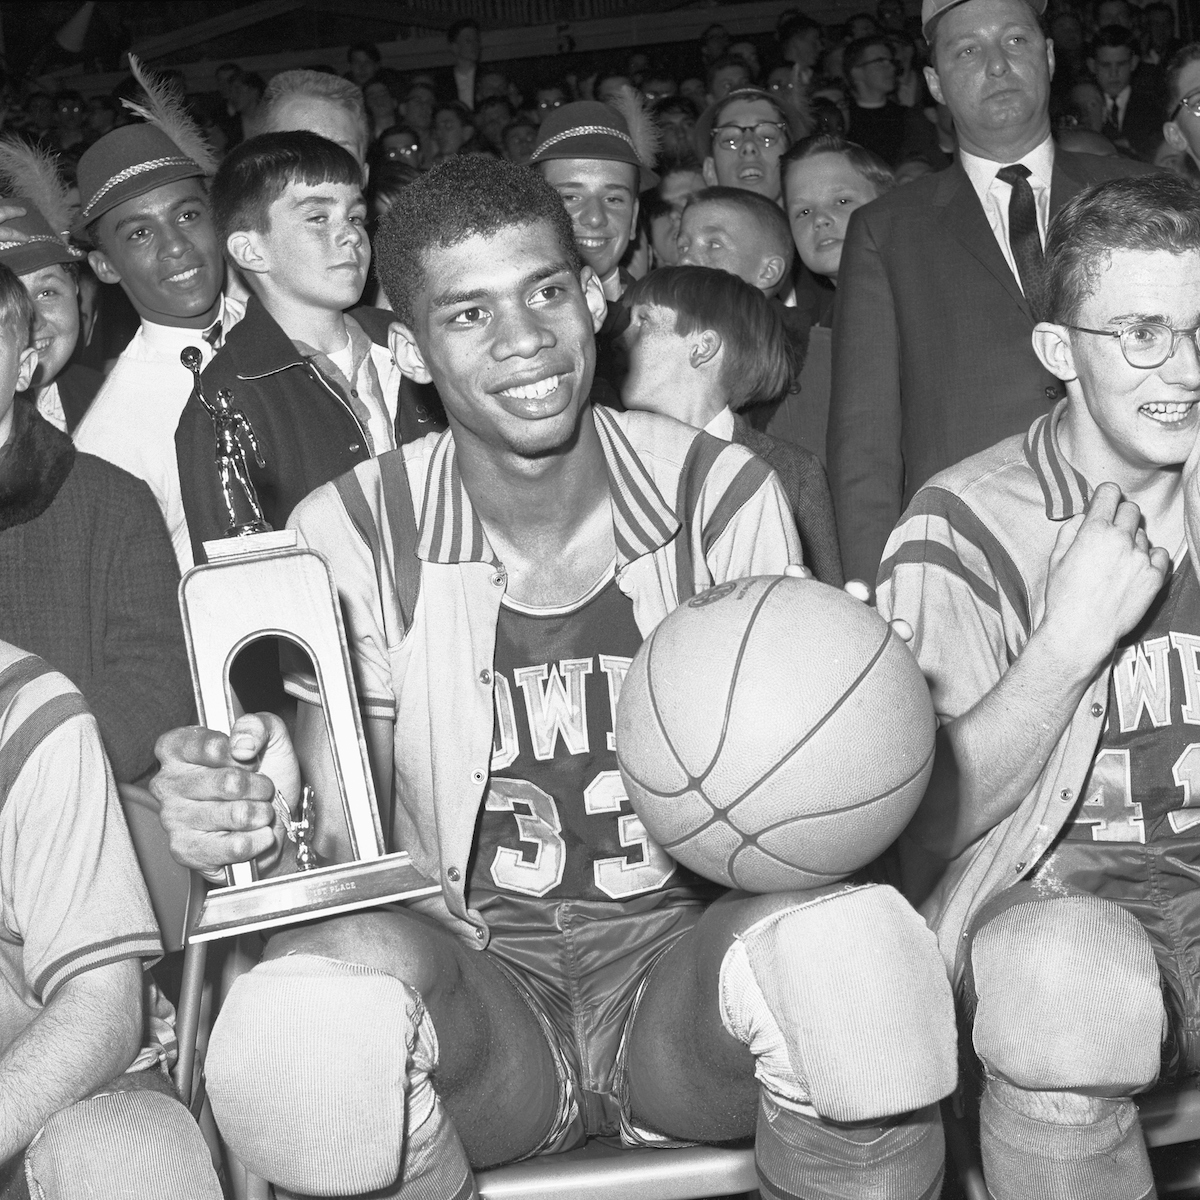 Power Memorial High School player Lew Alcindor proudly displays his MVP trophy and the game basketball in 1965